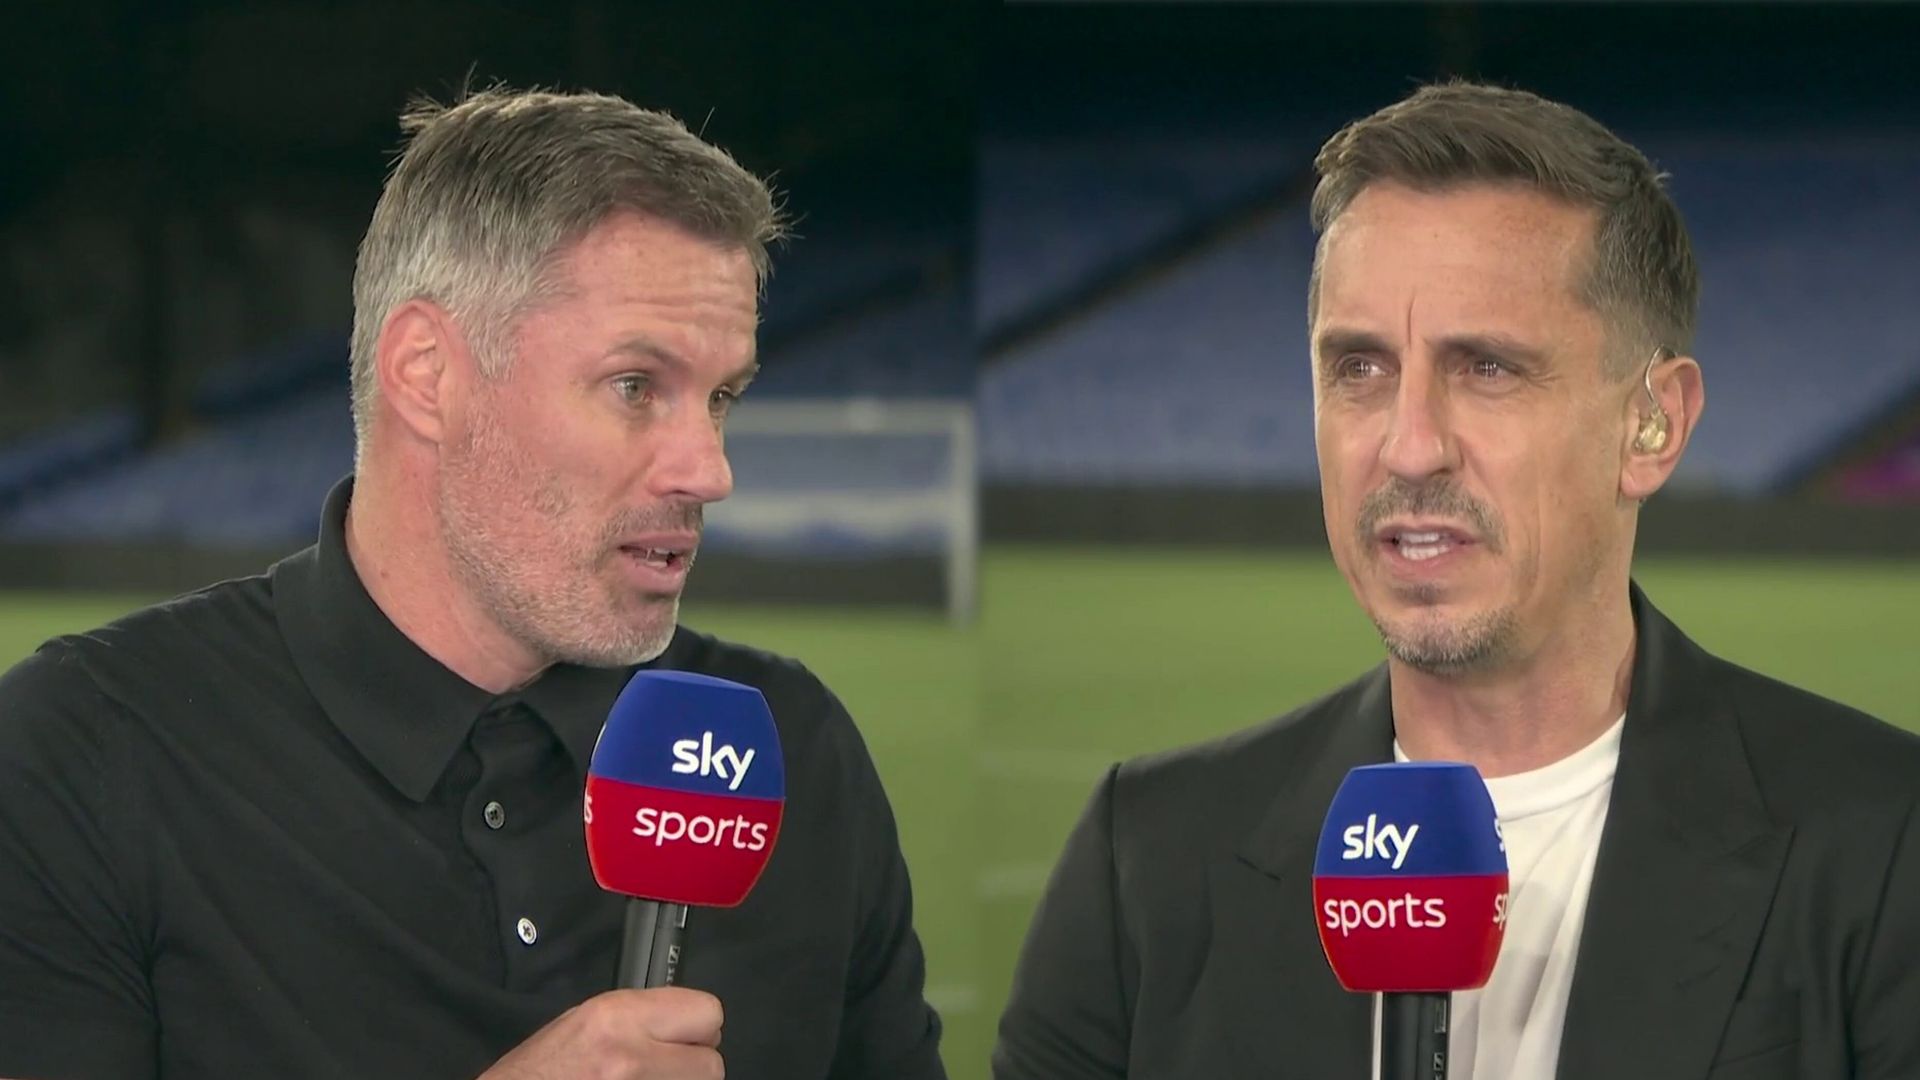 Live football on Sky Sports: Carragher and Neville on MNF